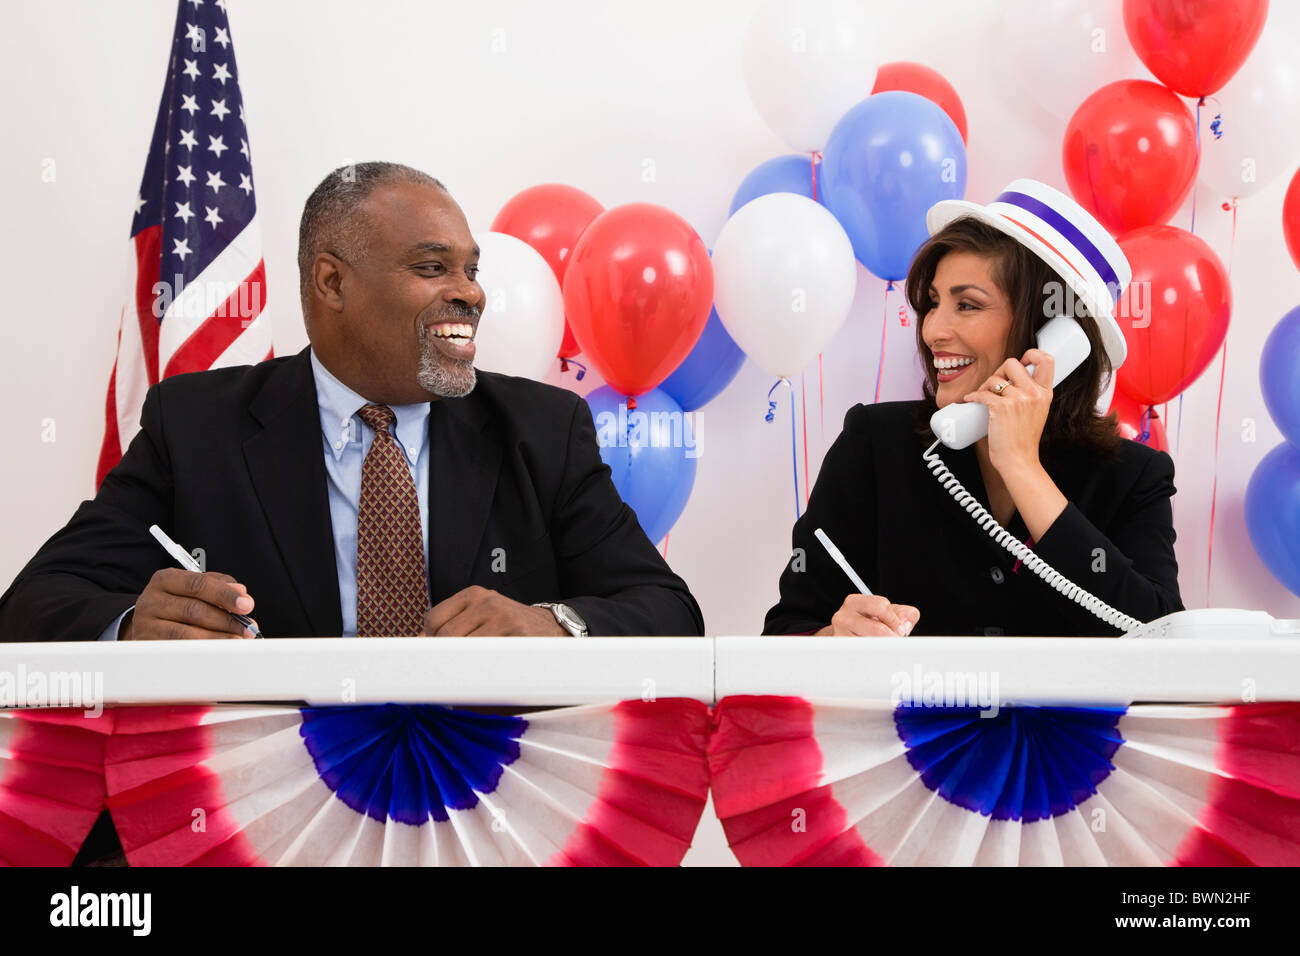 USA, Illinois, Metamora, Smiling man and woman at polling place table, red and blue balloons in background Stock Photo